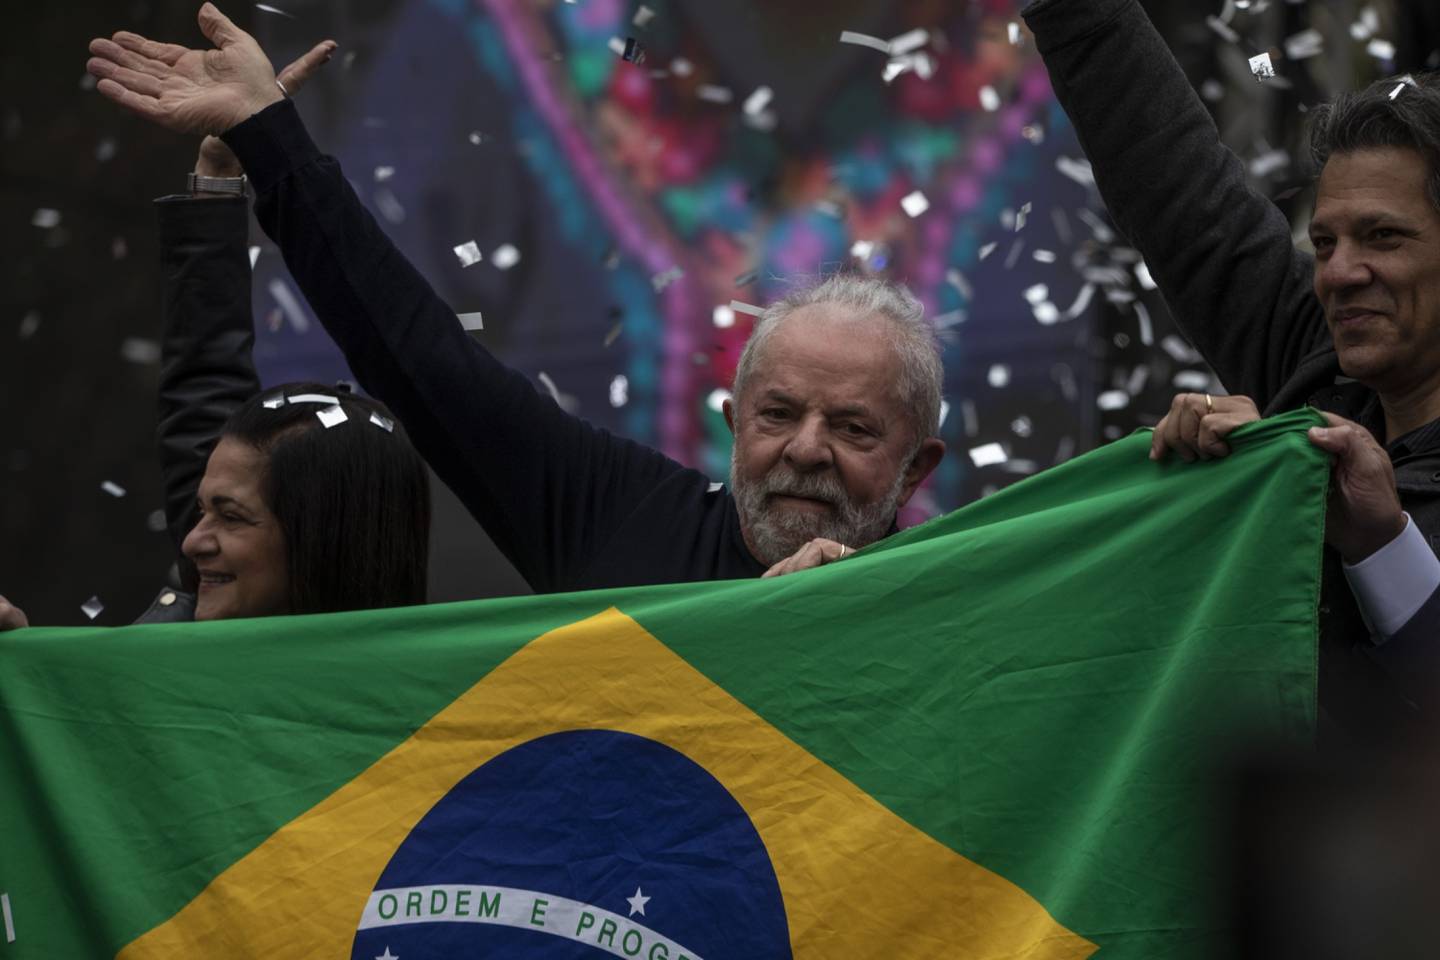 “I want to come back to do a better government than I did,” Lula, who governed Brazil between 2003 and late 2010, said.